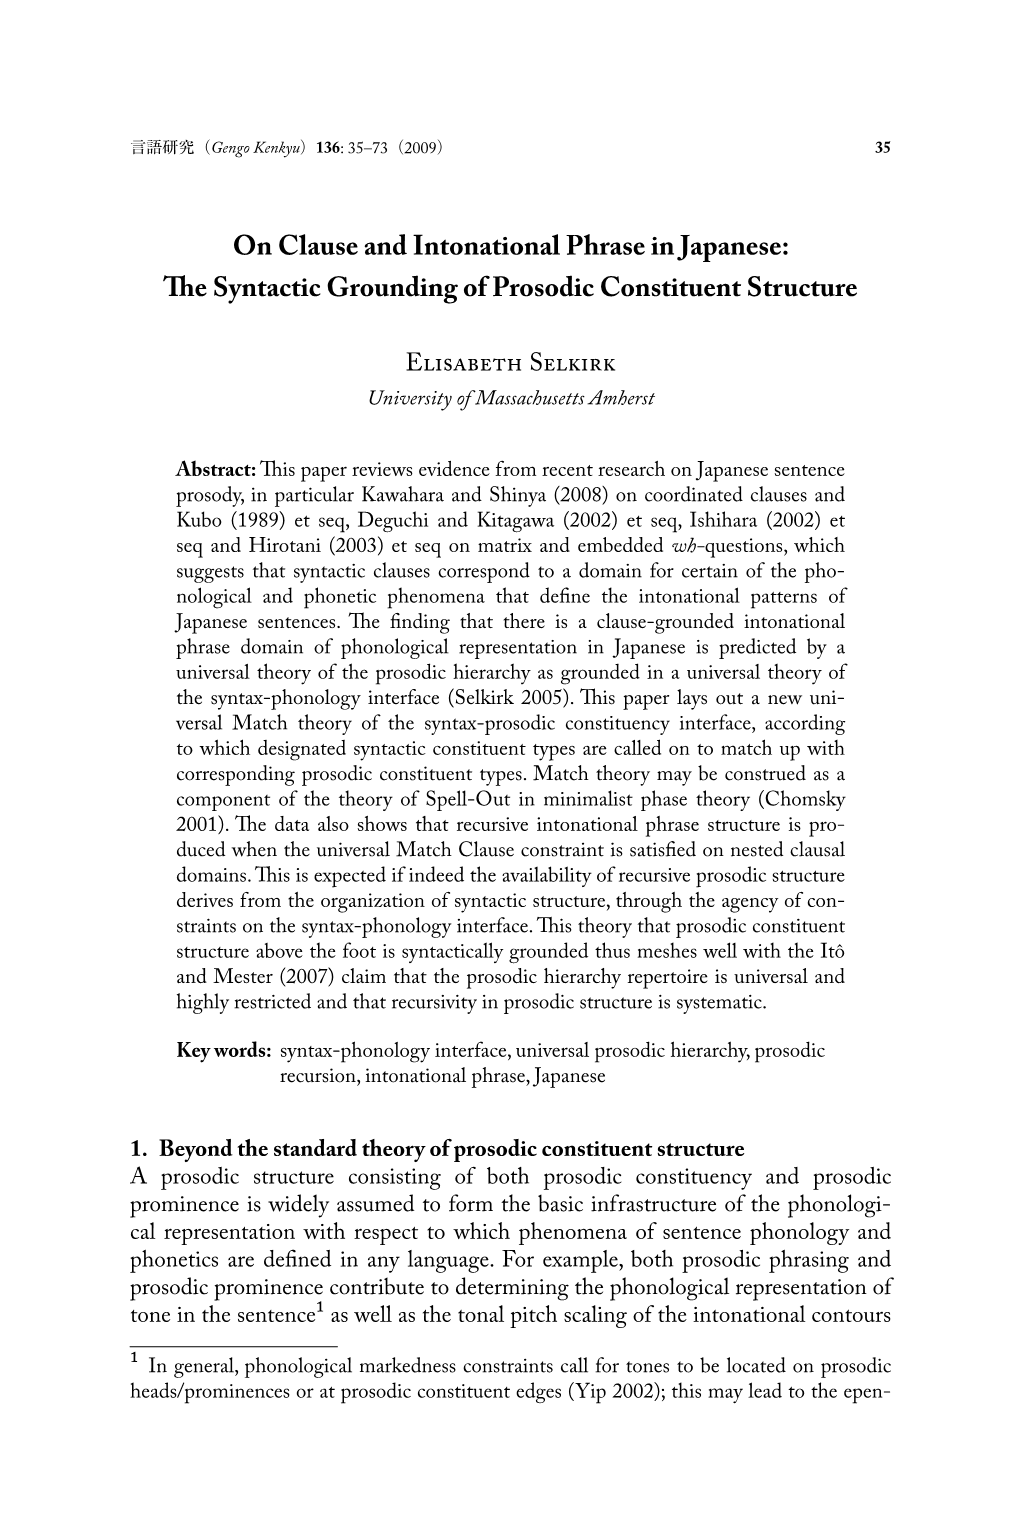 On Clause and Intonational Phrase in Japanese: Th E Syntactic Grounding of Prosodic Constituent Structure